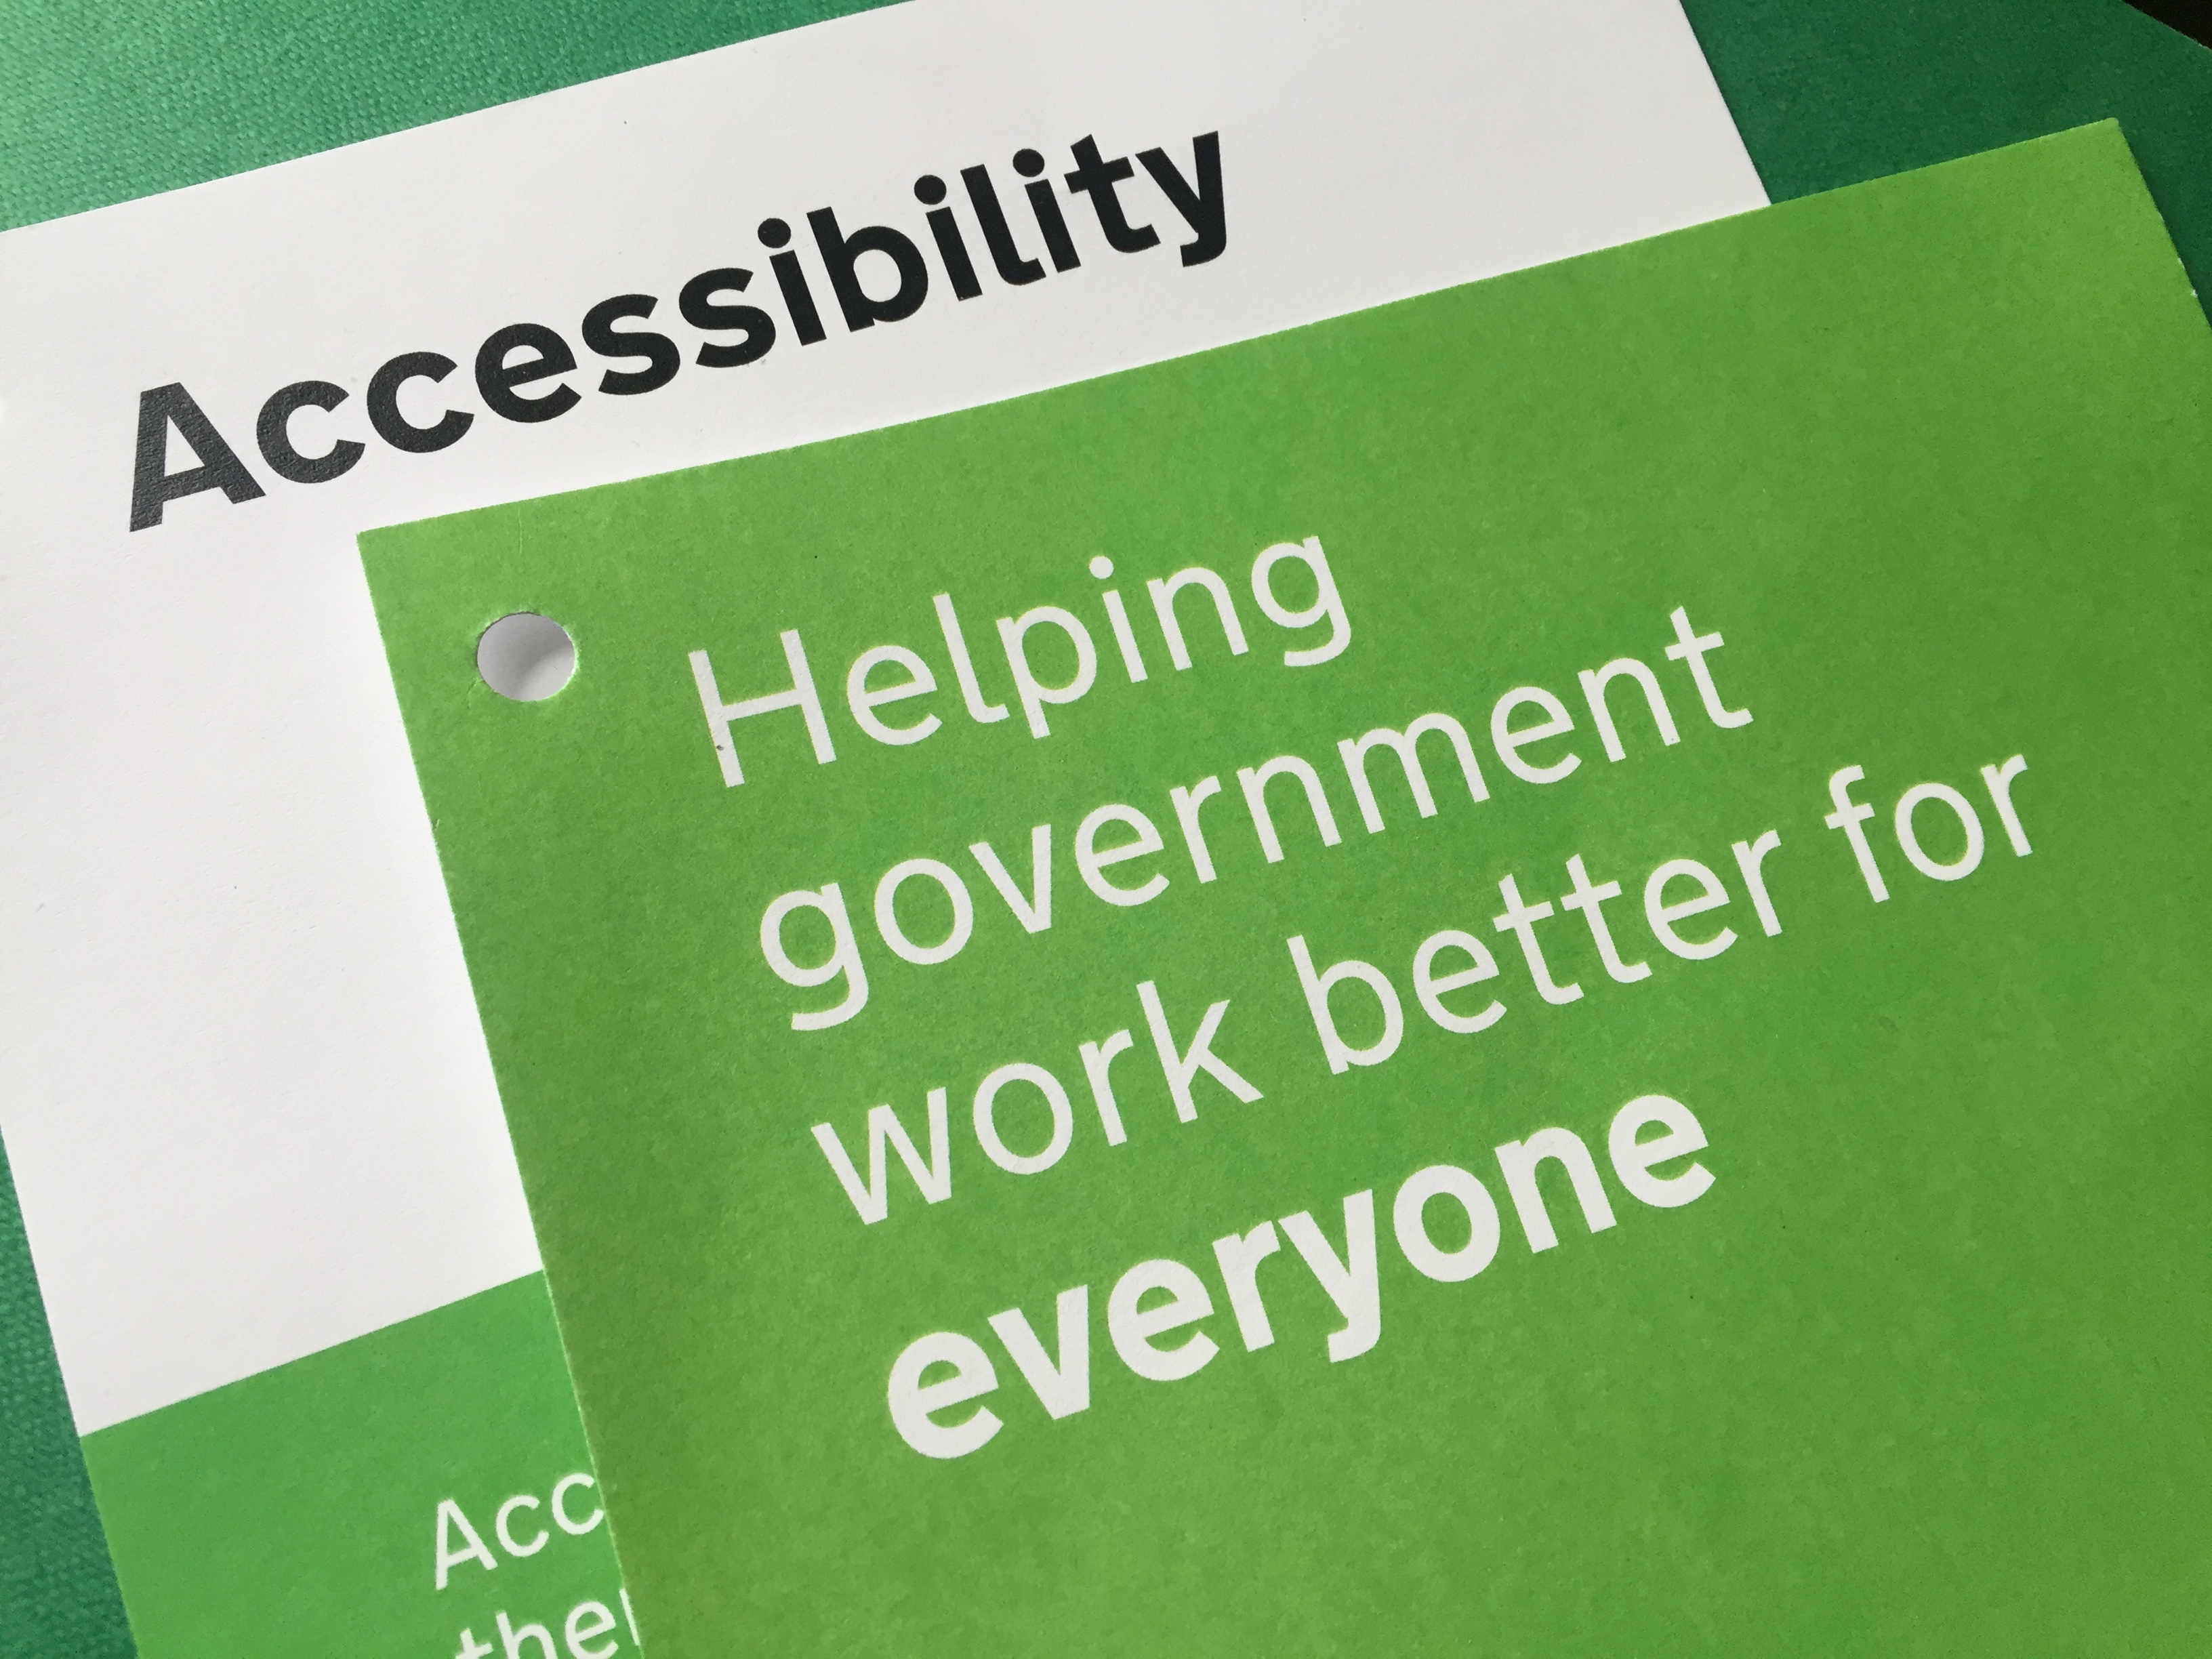 Pages of the delegate pack stating 'accessibility' and 'helping government work better for everyone'.